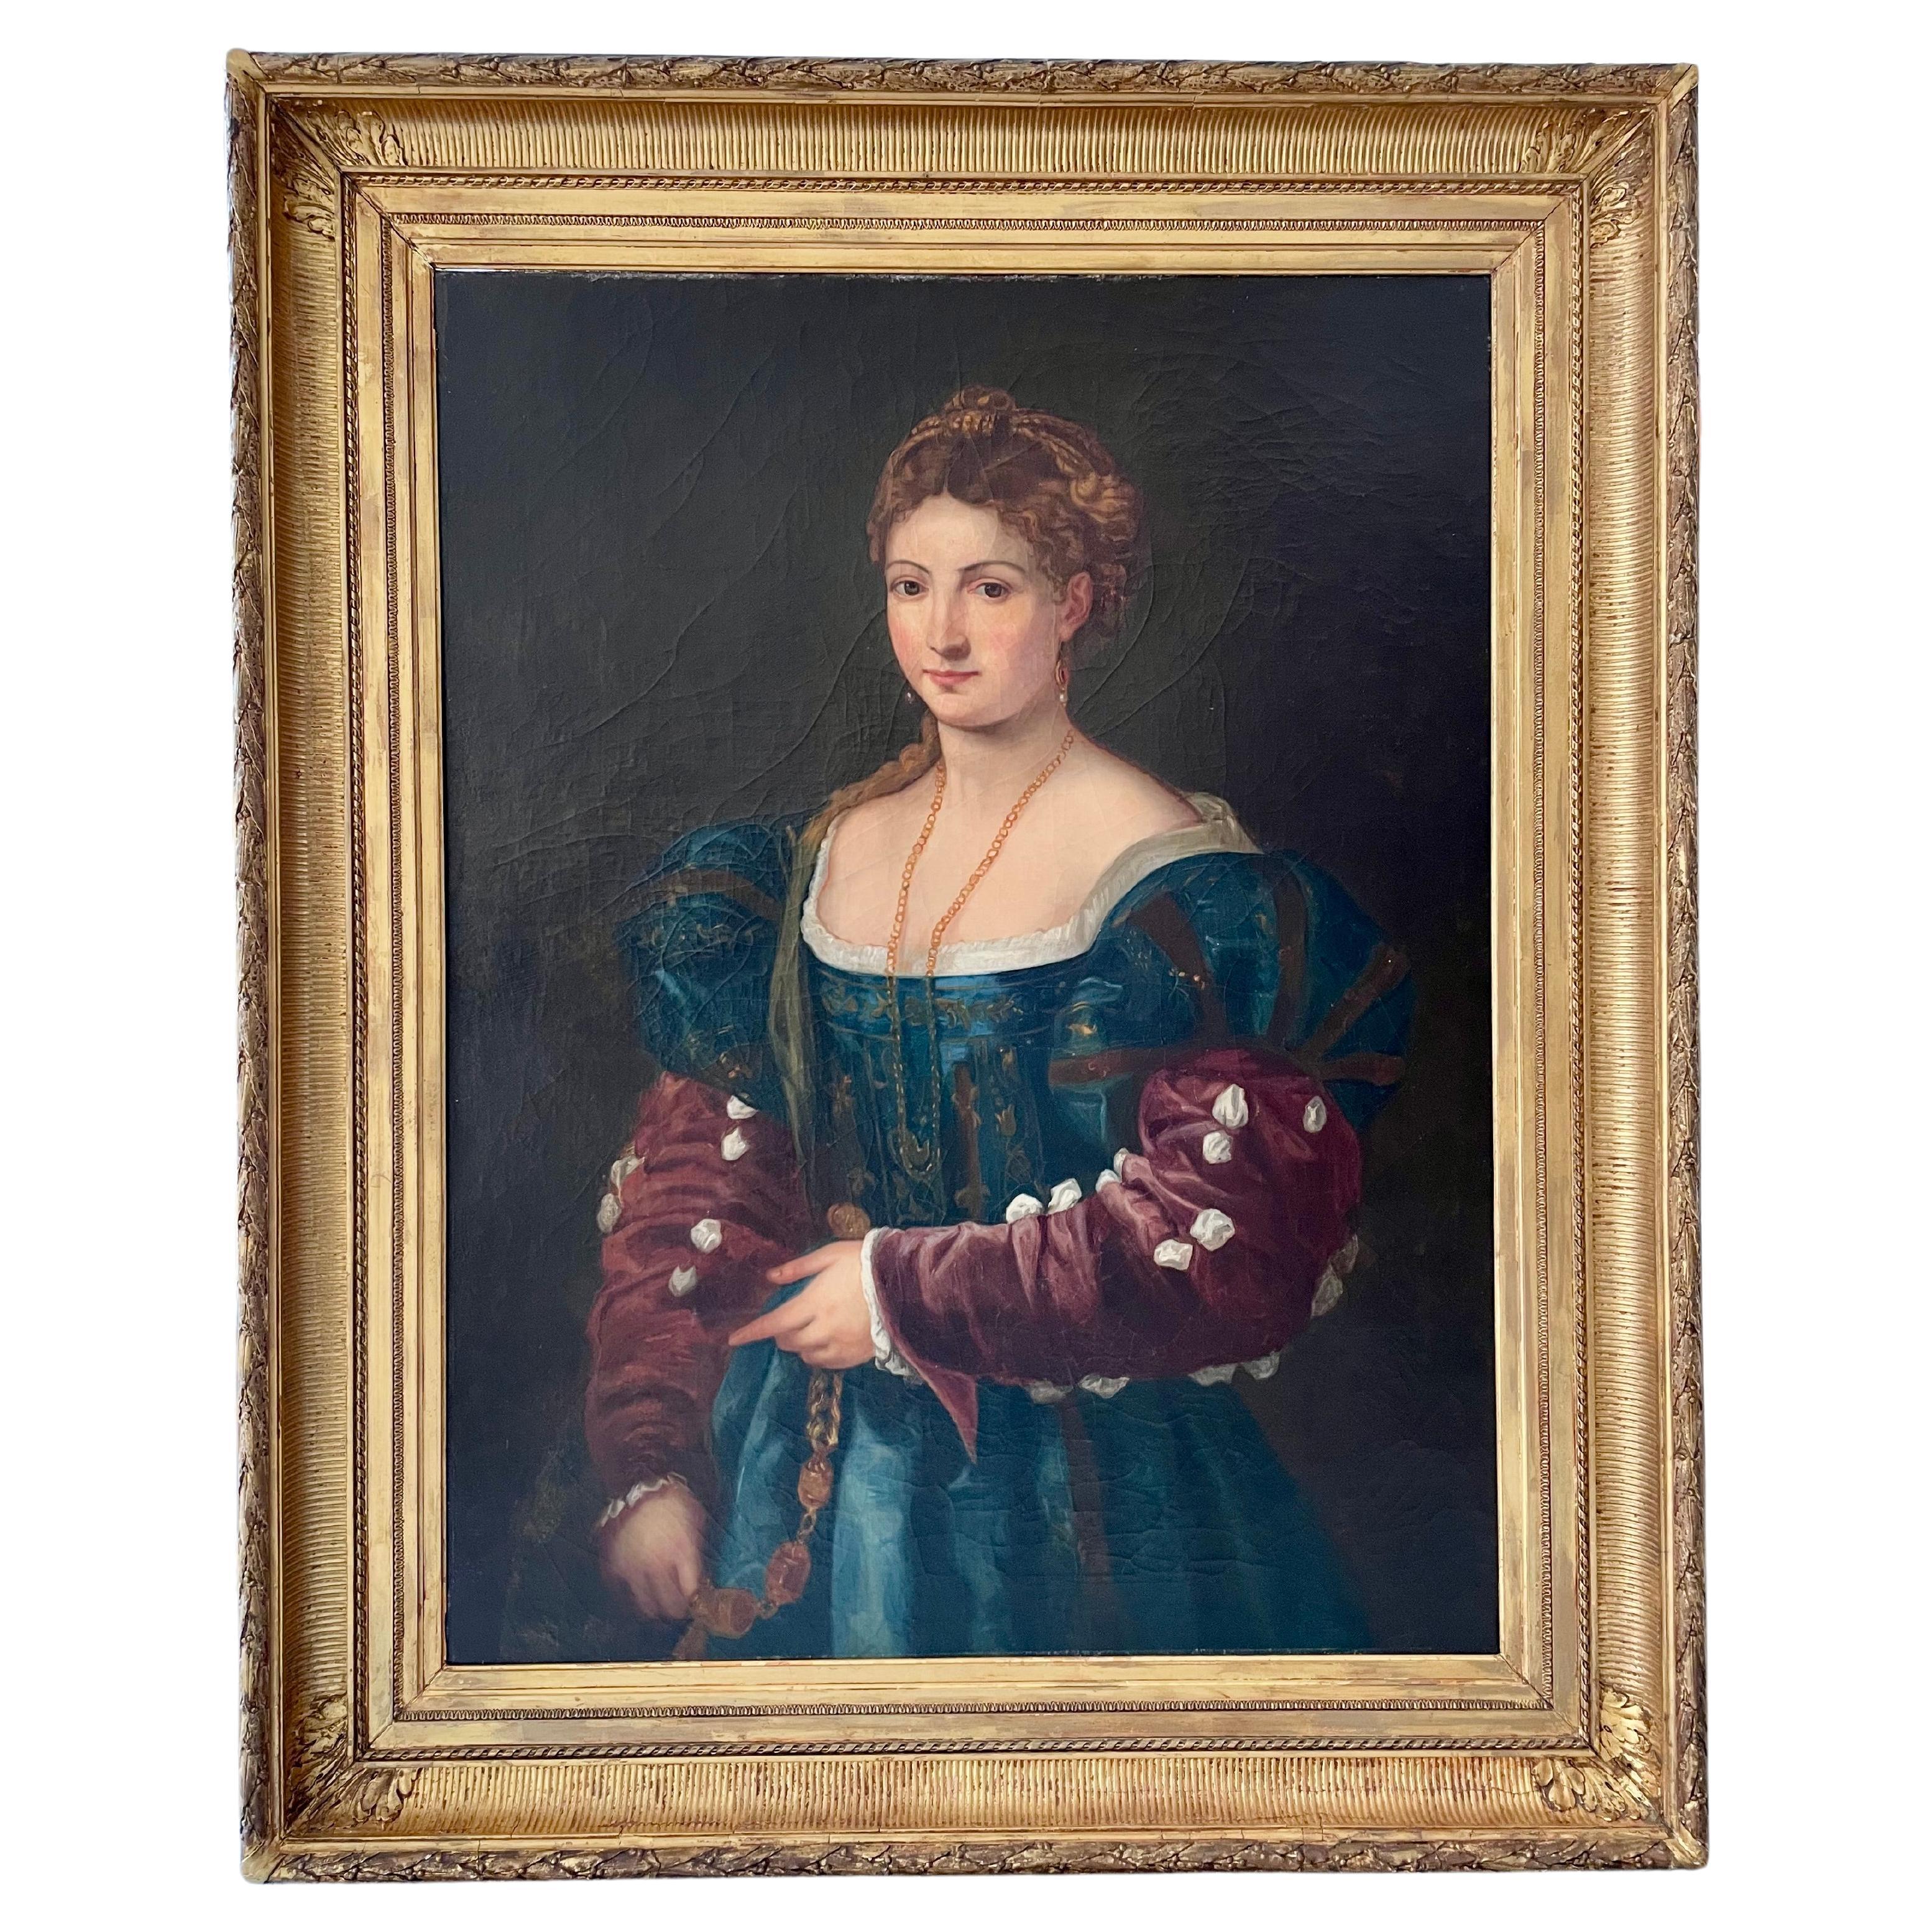 19th Century Italian Painting After Titian "La Bella" For Sale